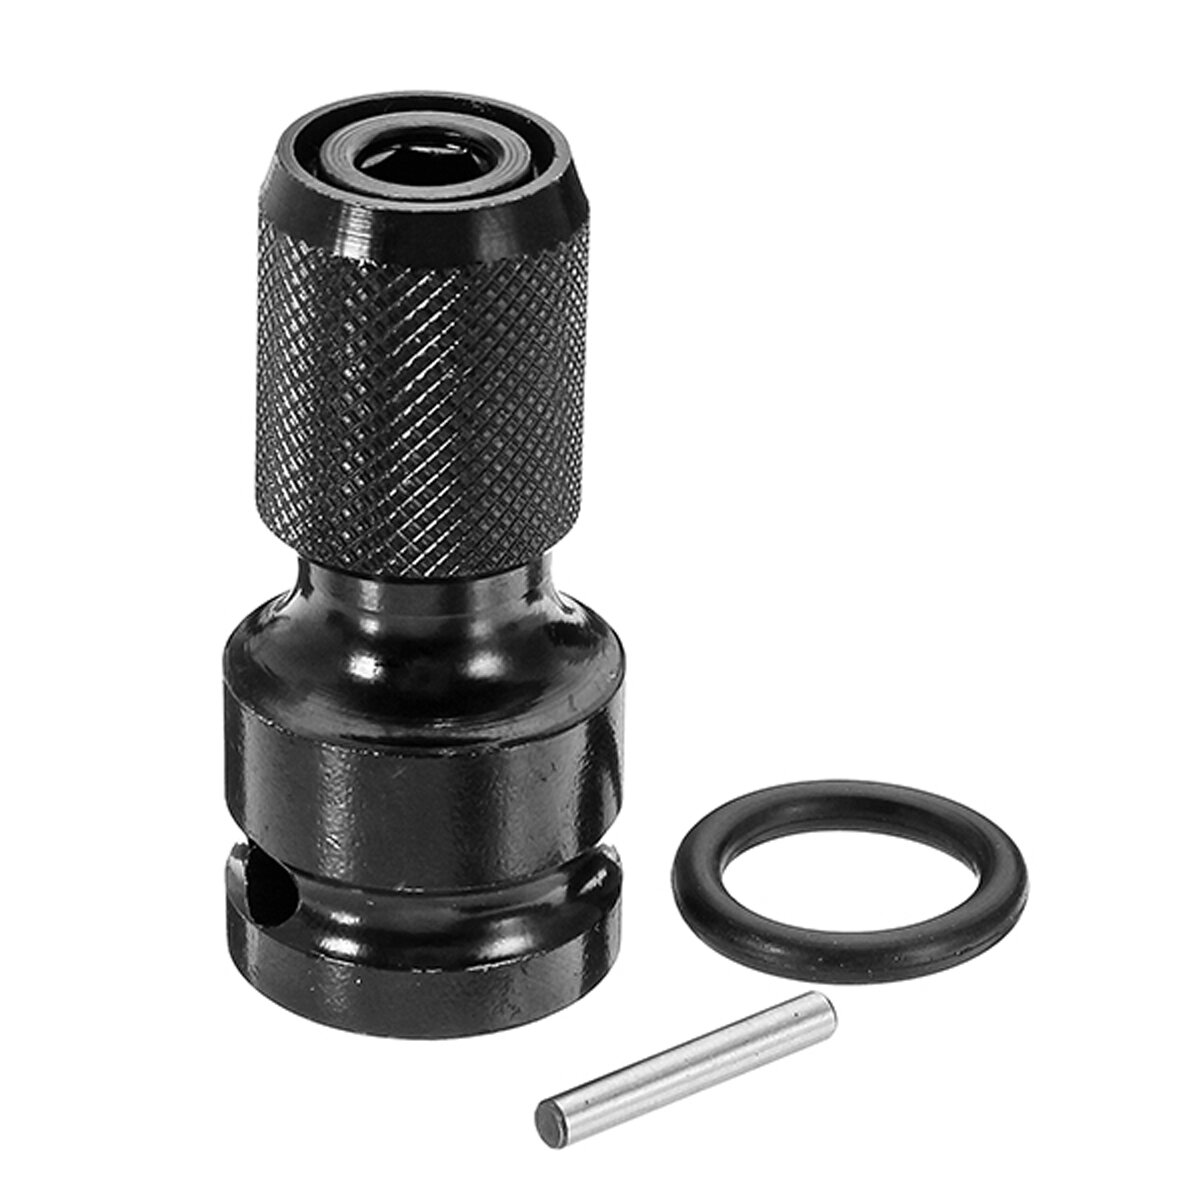 1/2Inch Square Drive to 1/4 Inch Hex Shank Adapter Telescopic Socket Drill